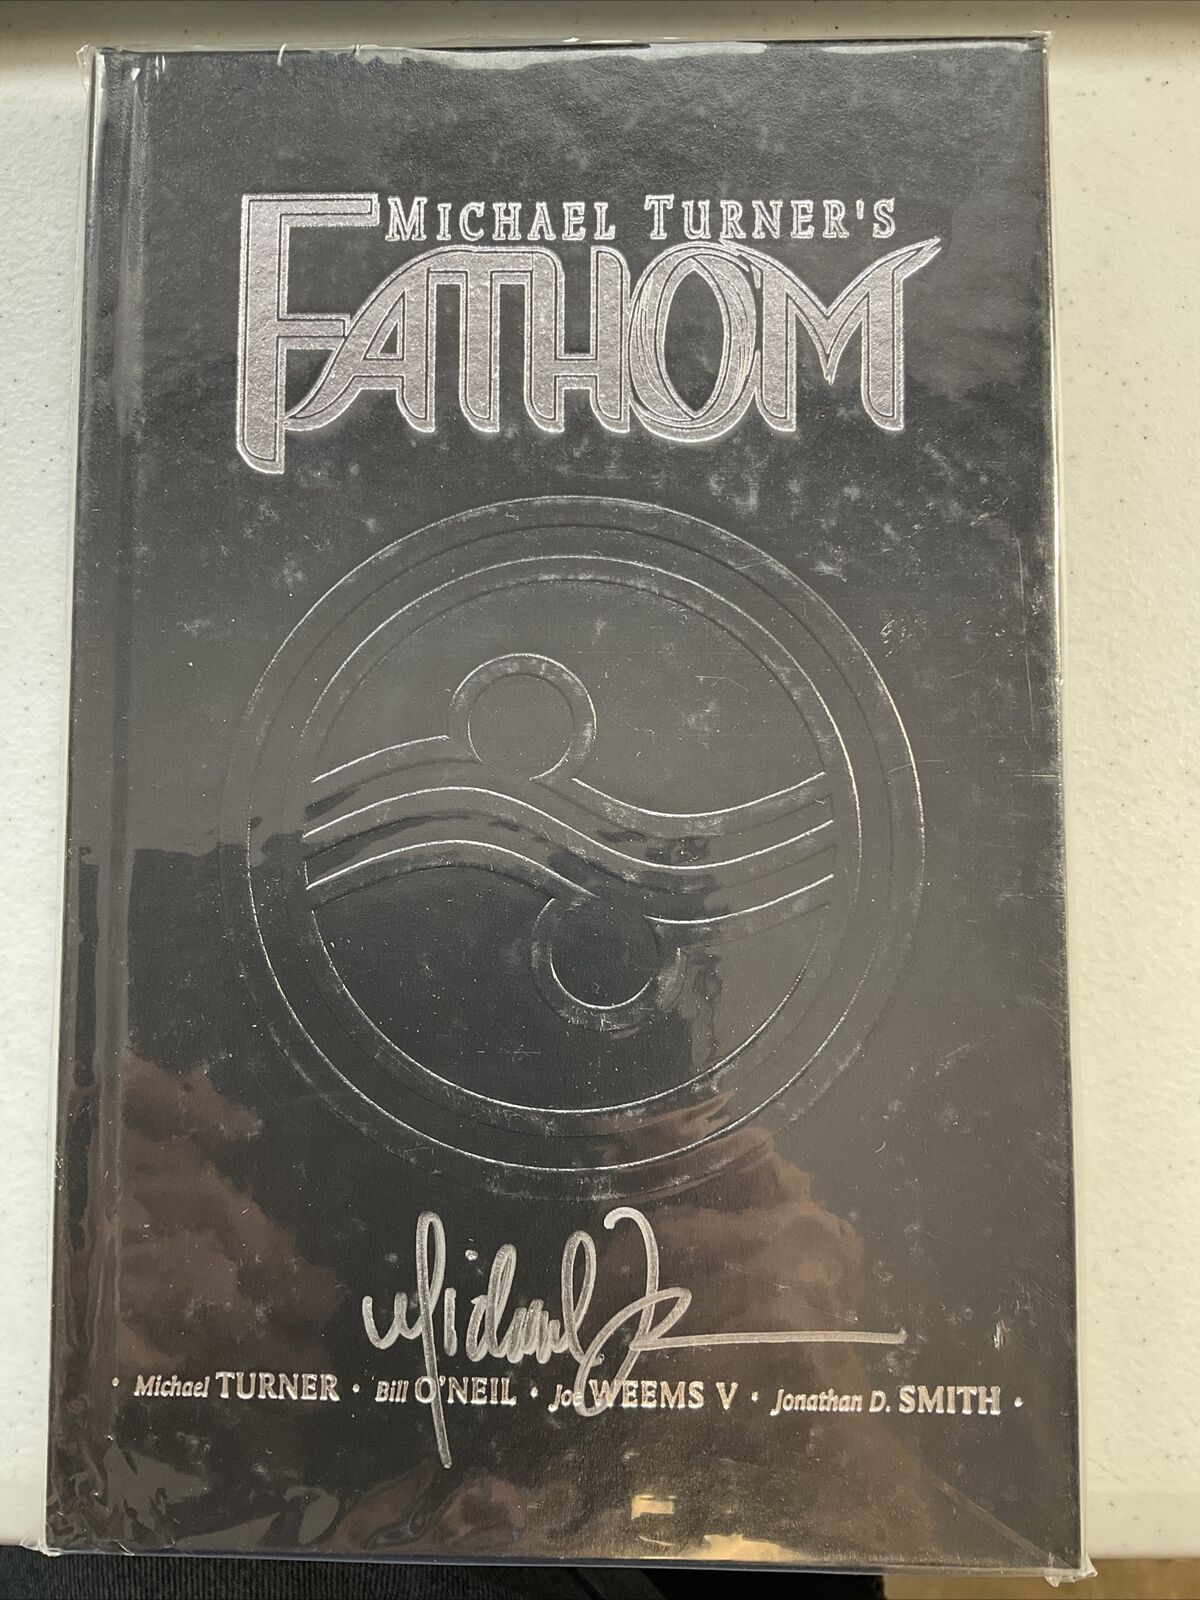 Fathom (2001) Michael Turner Image Top Cow Hardcover Autographed